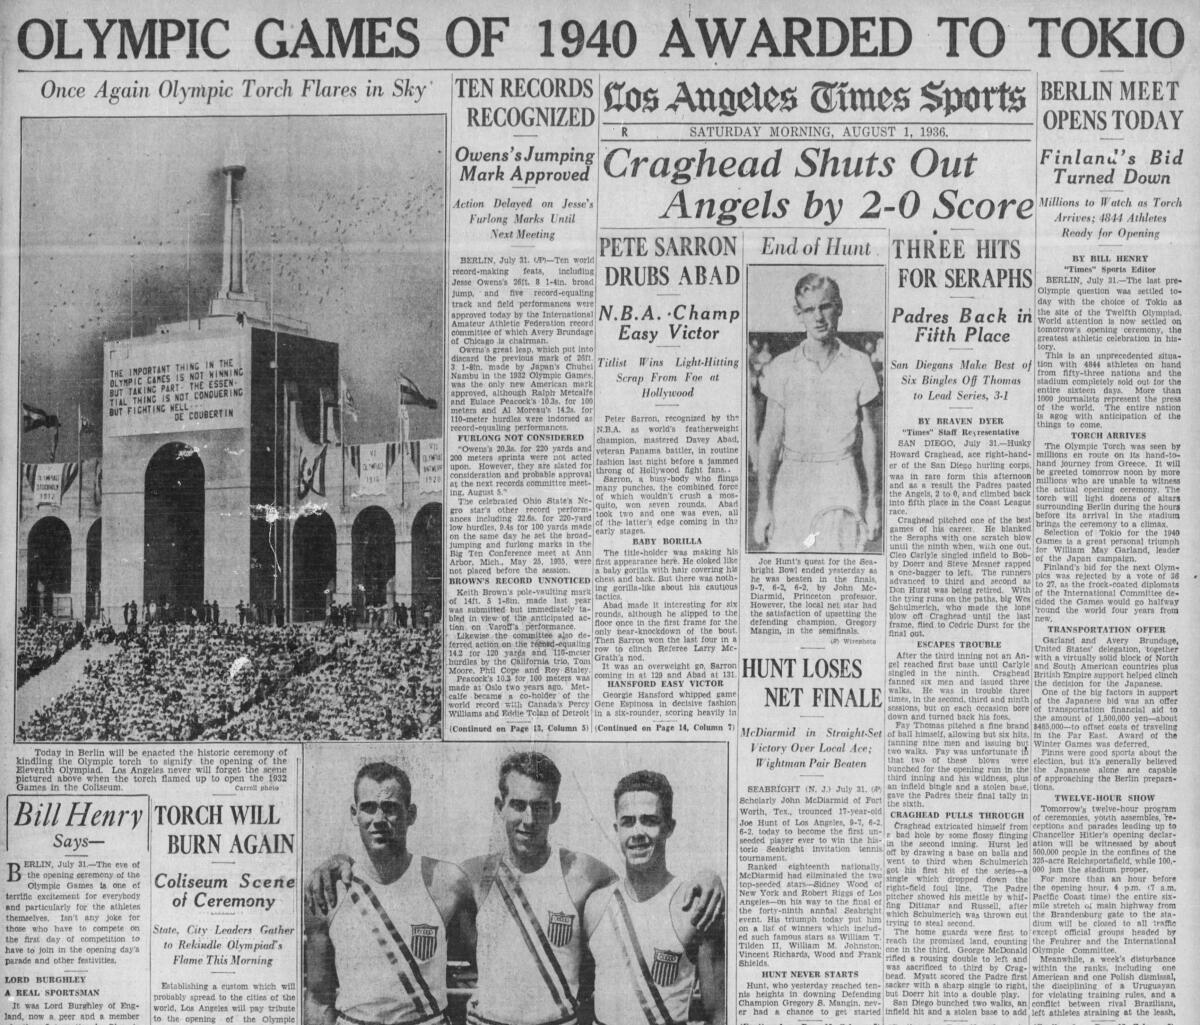 Los Angeles Times sports page from August 1, 1936, detailing Berlin Olympics.